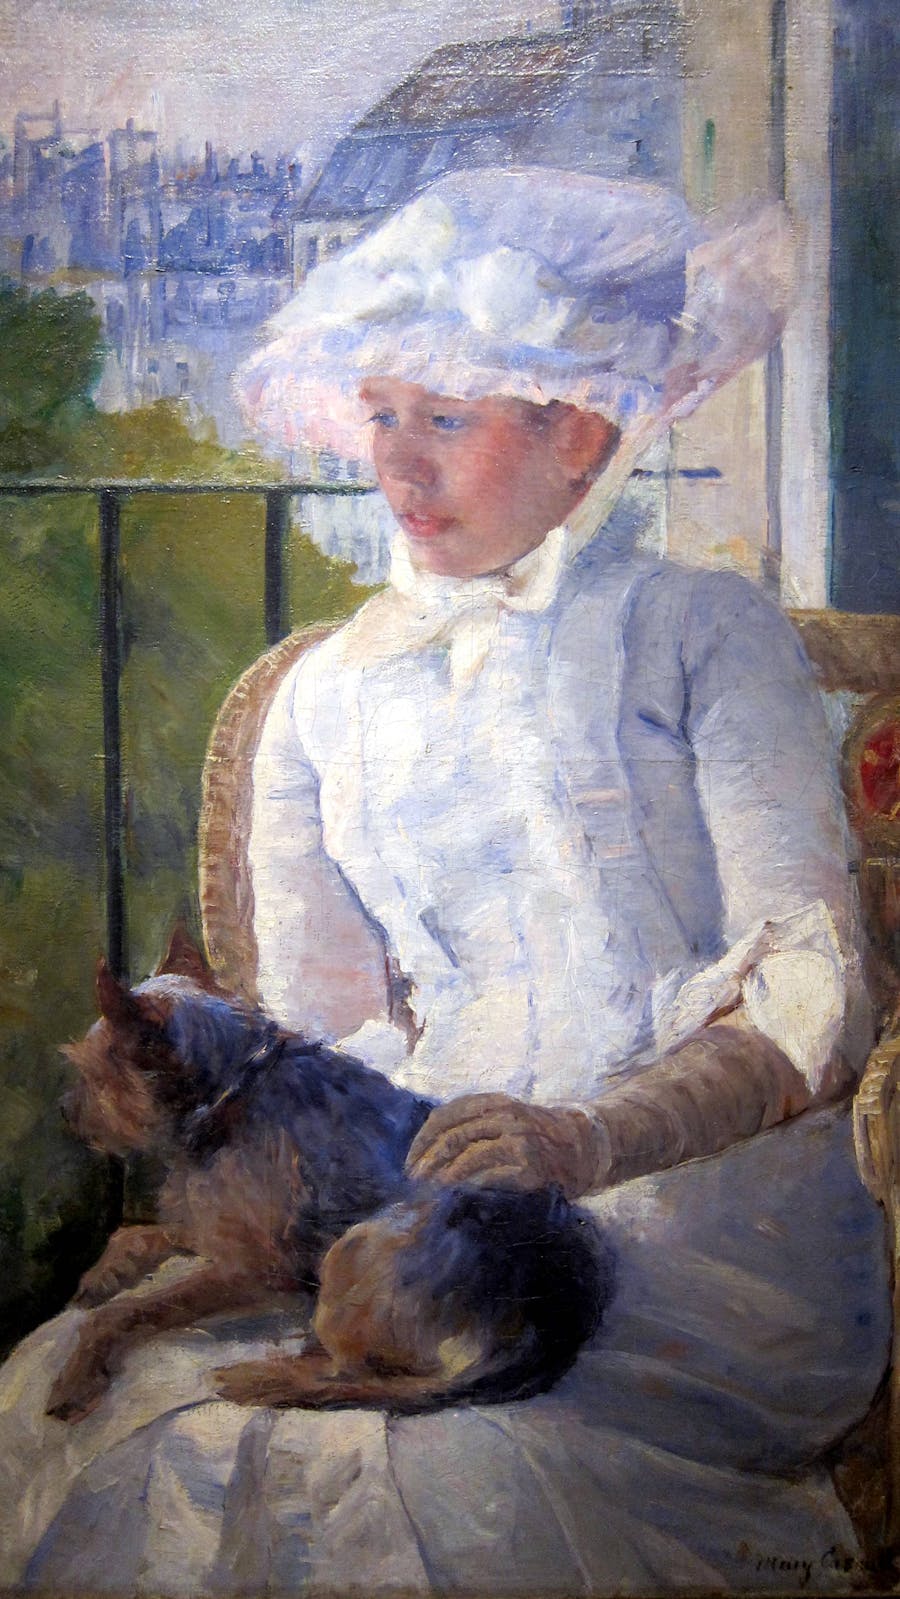 Mary Cassatt, ‘Young Girl at a Window’, 1885, oil on canvas, National Gallery of Art, Washington, D.C. Photo: Wiki Commons